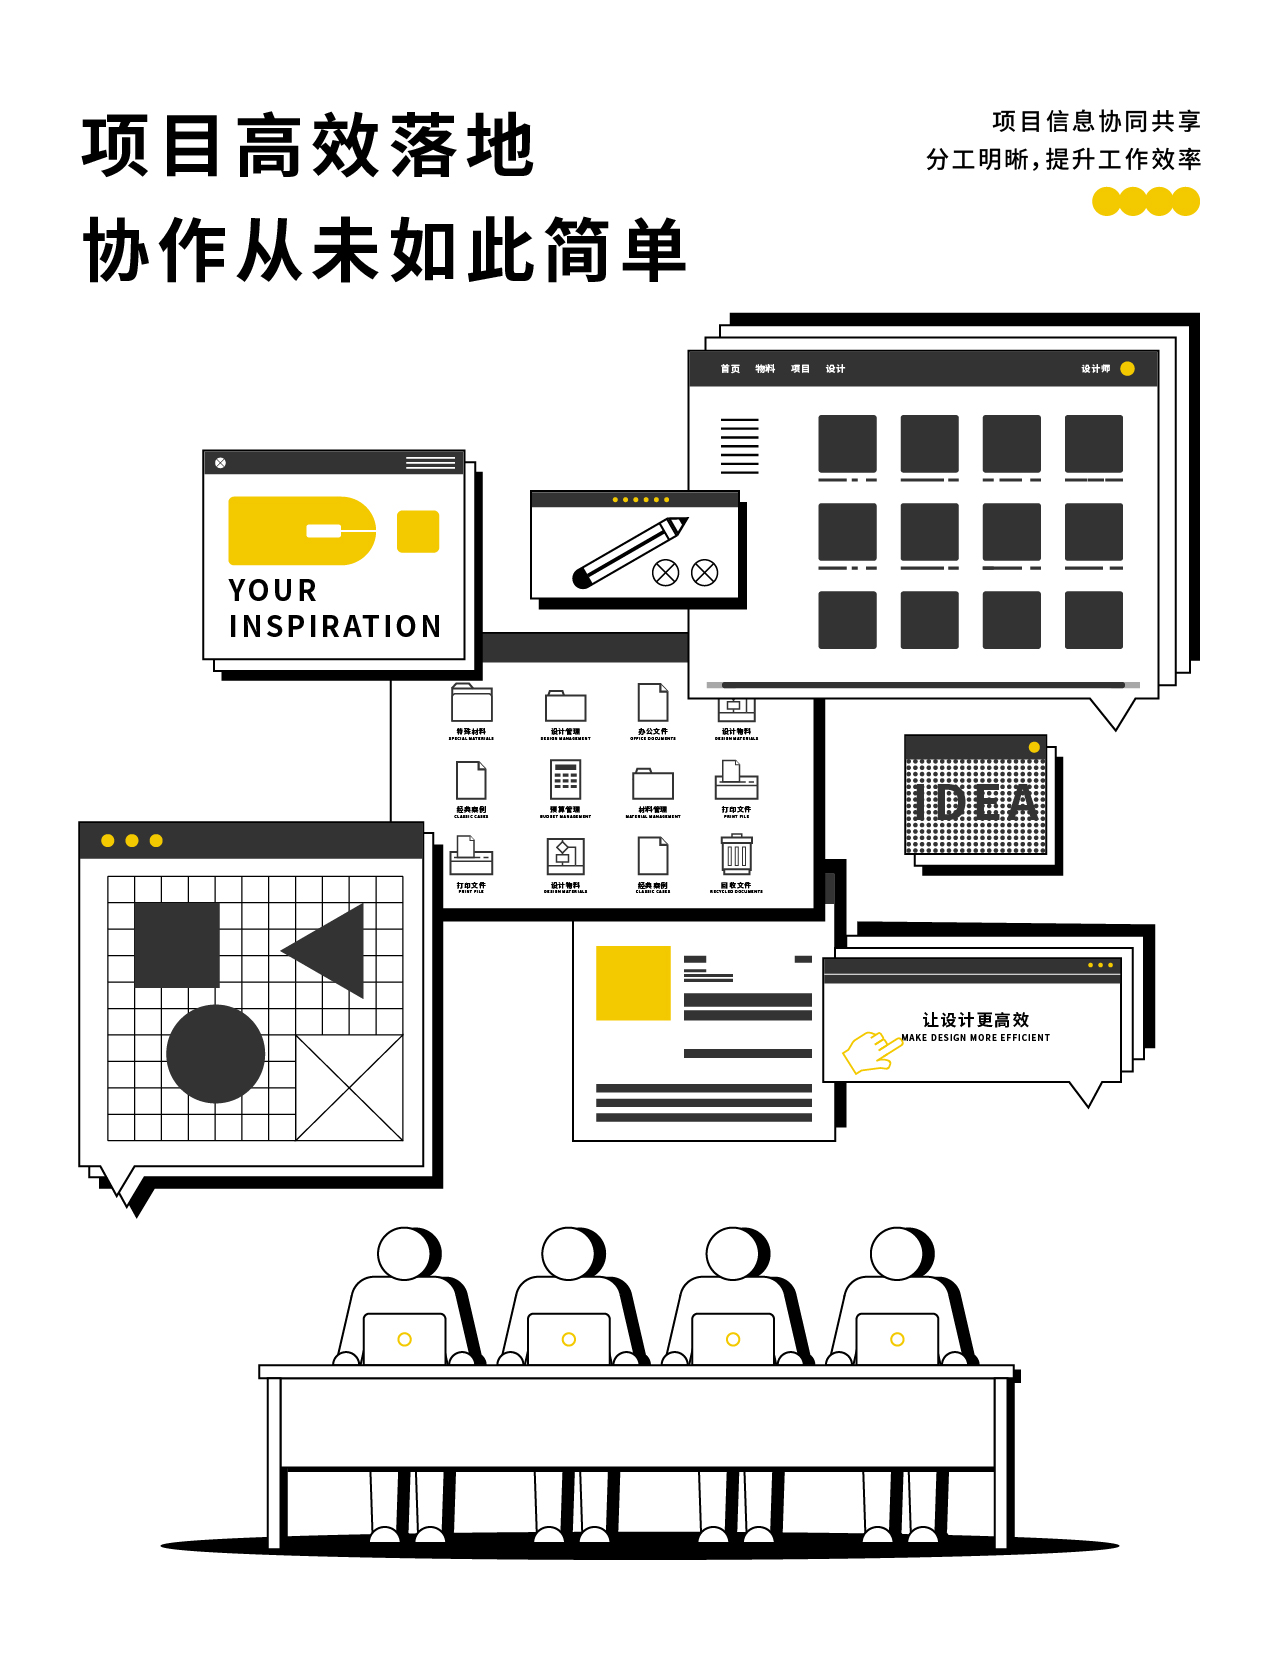 "IDEAFUSION" Digital Platform Is Officially Opened To The Public.